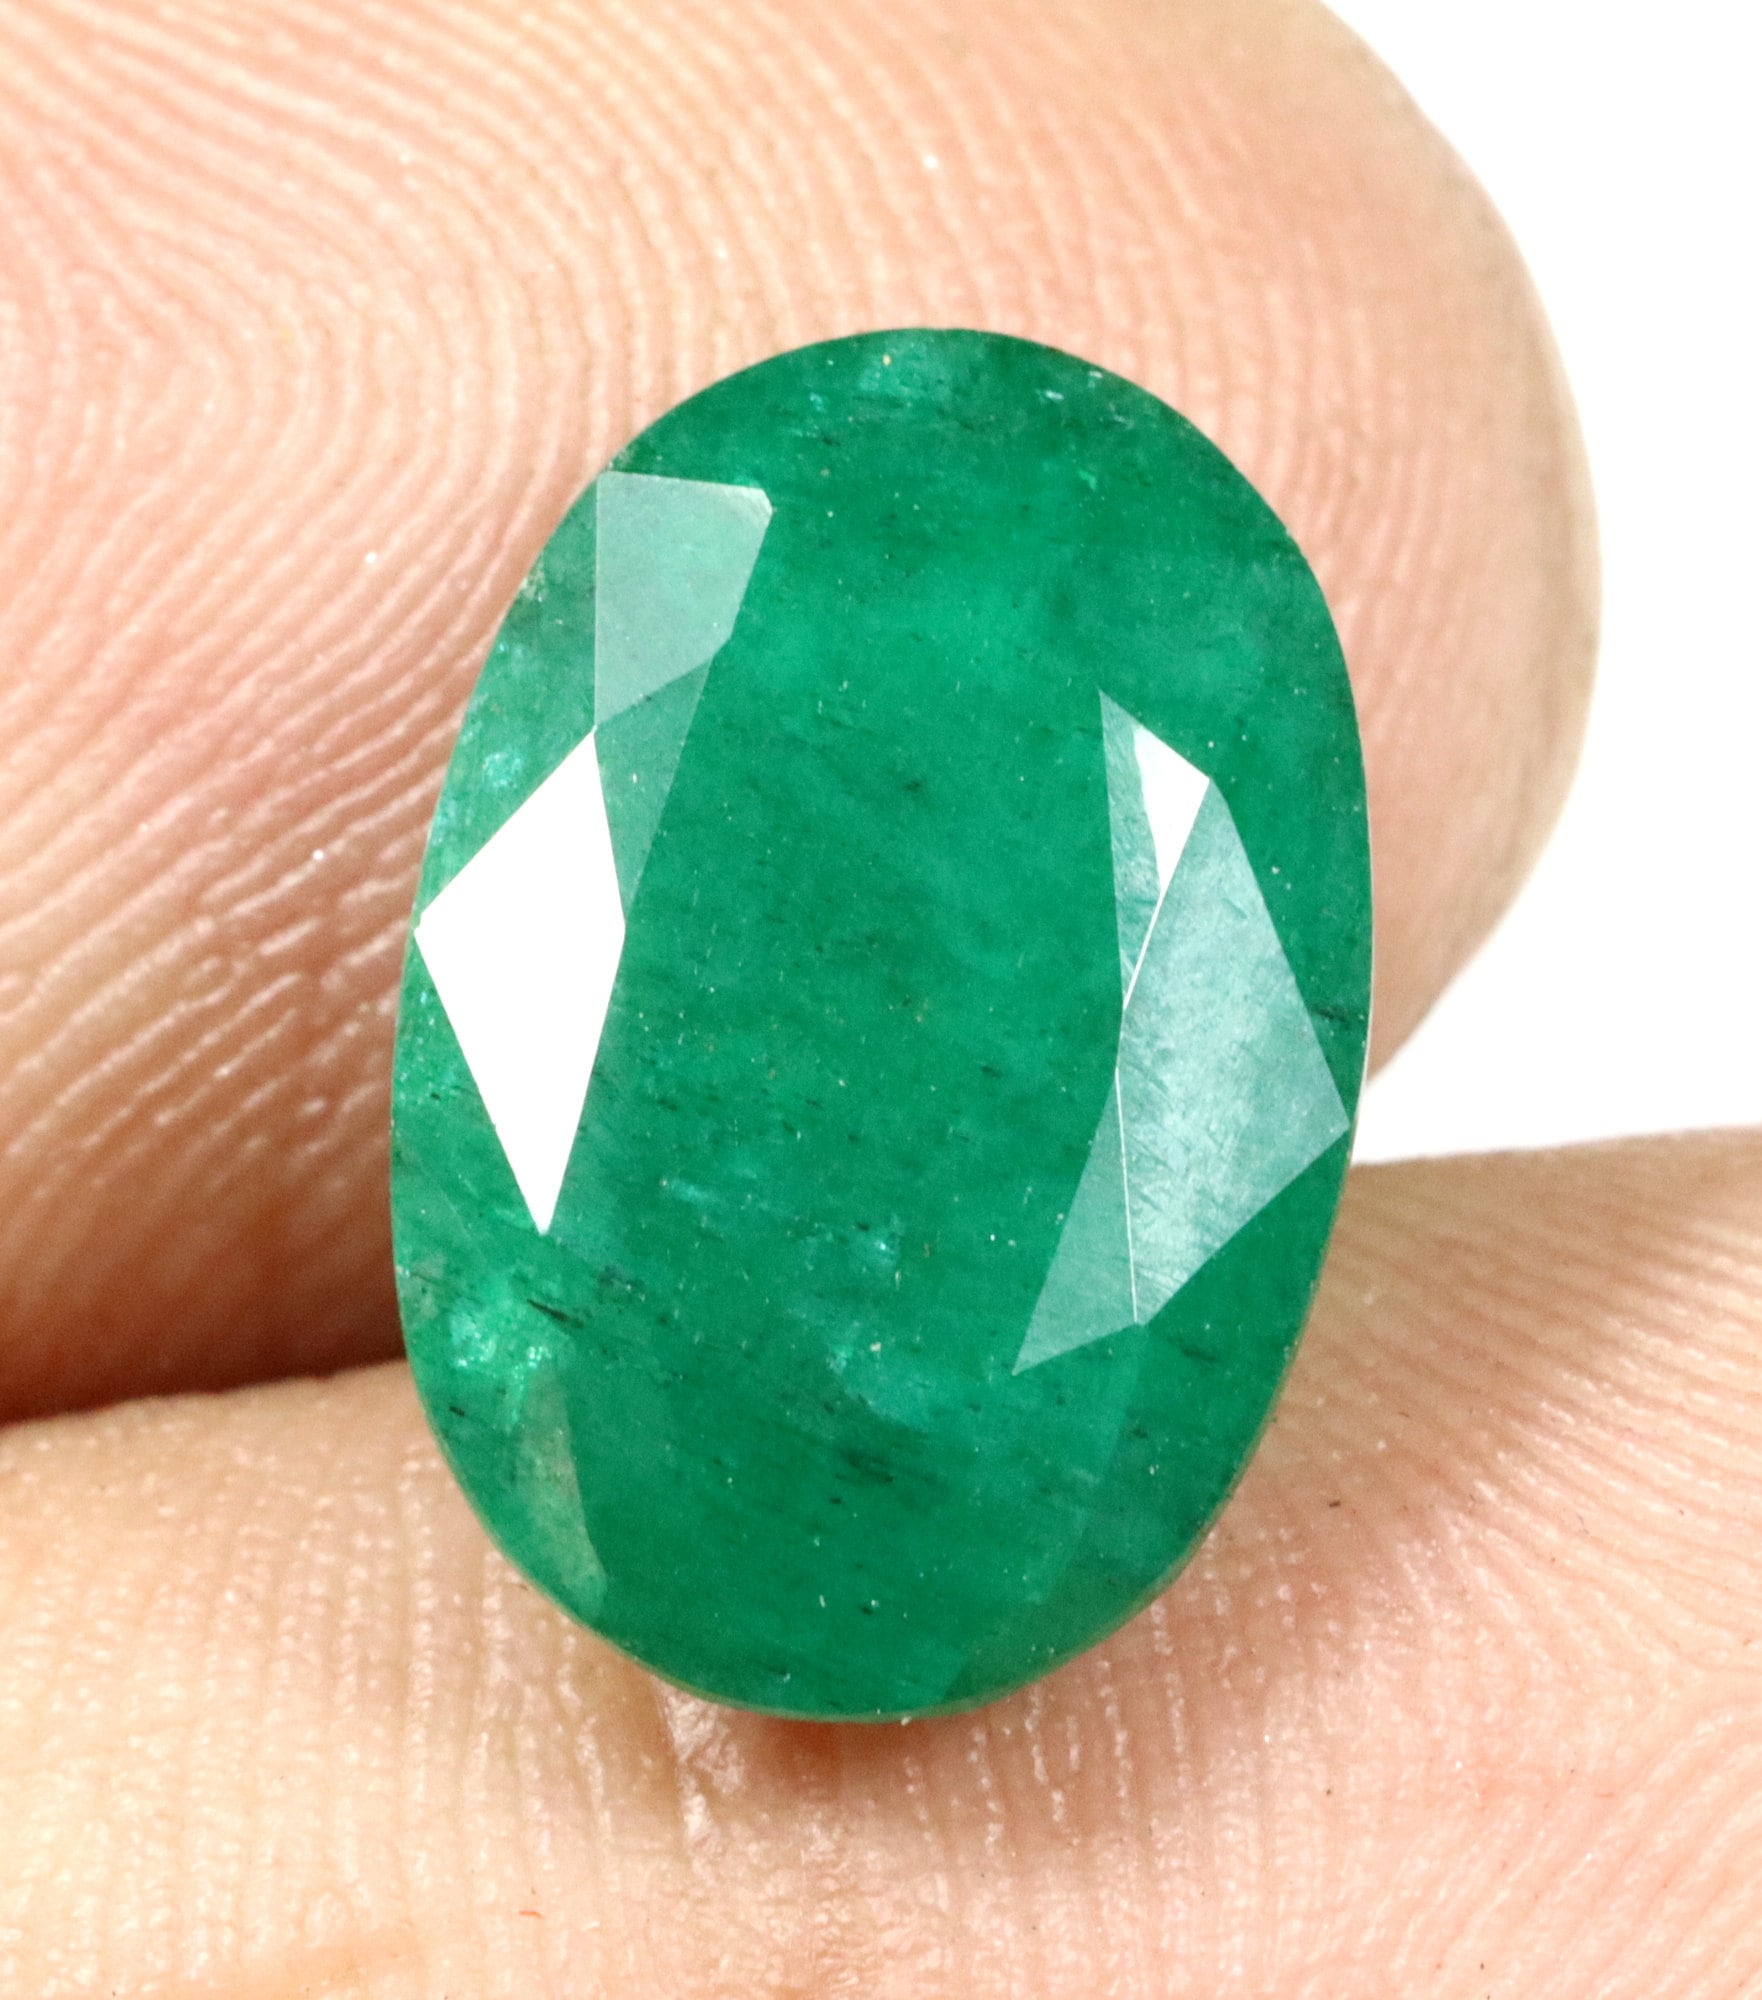 Natural Emerald Faceted Gemstone Pendant Size Round Shape Green Beryl Emerald For Making Jewelry Emerald Gemstone 24.55 Carat 18x10 MM